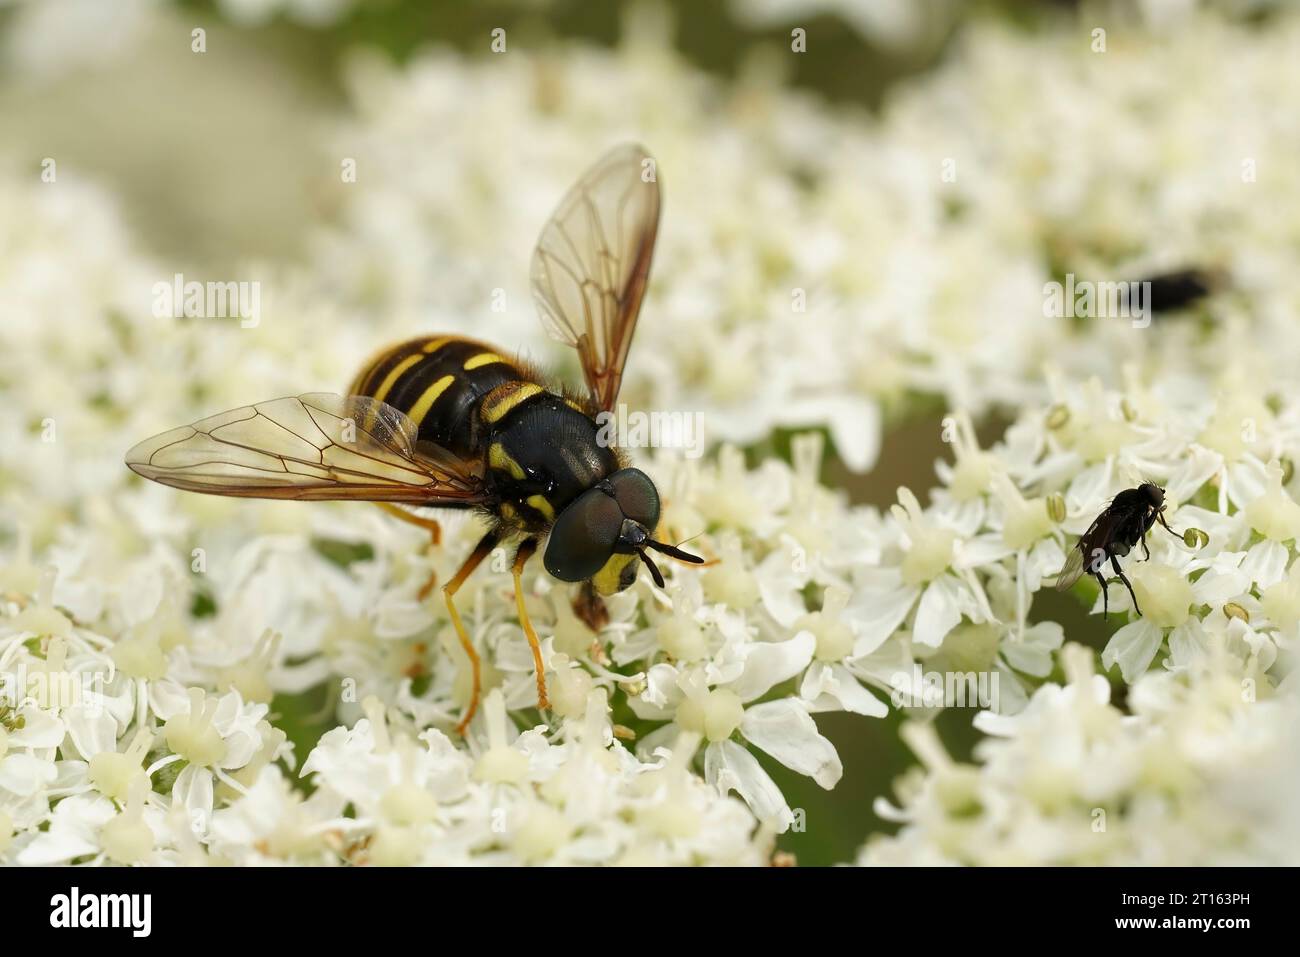 Natural closeup on he Northern spearhorn hoverfly, Chrysotoxum arcuatum sitting on a white Heracleum flower Stock Photo